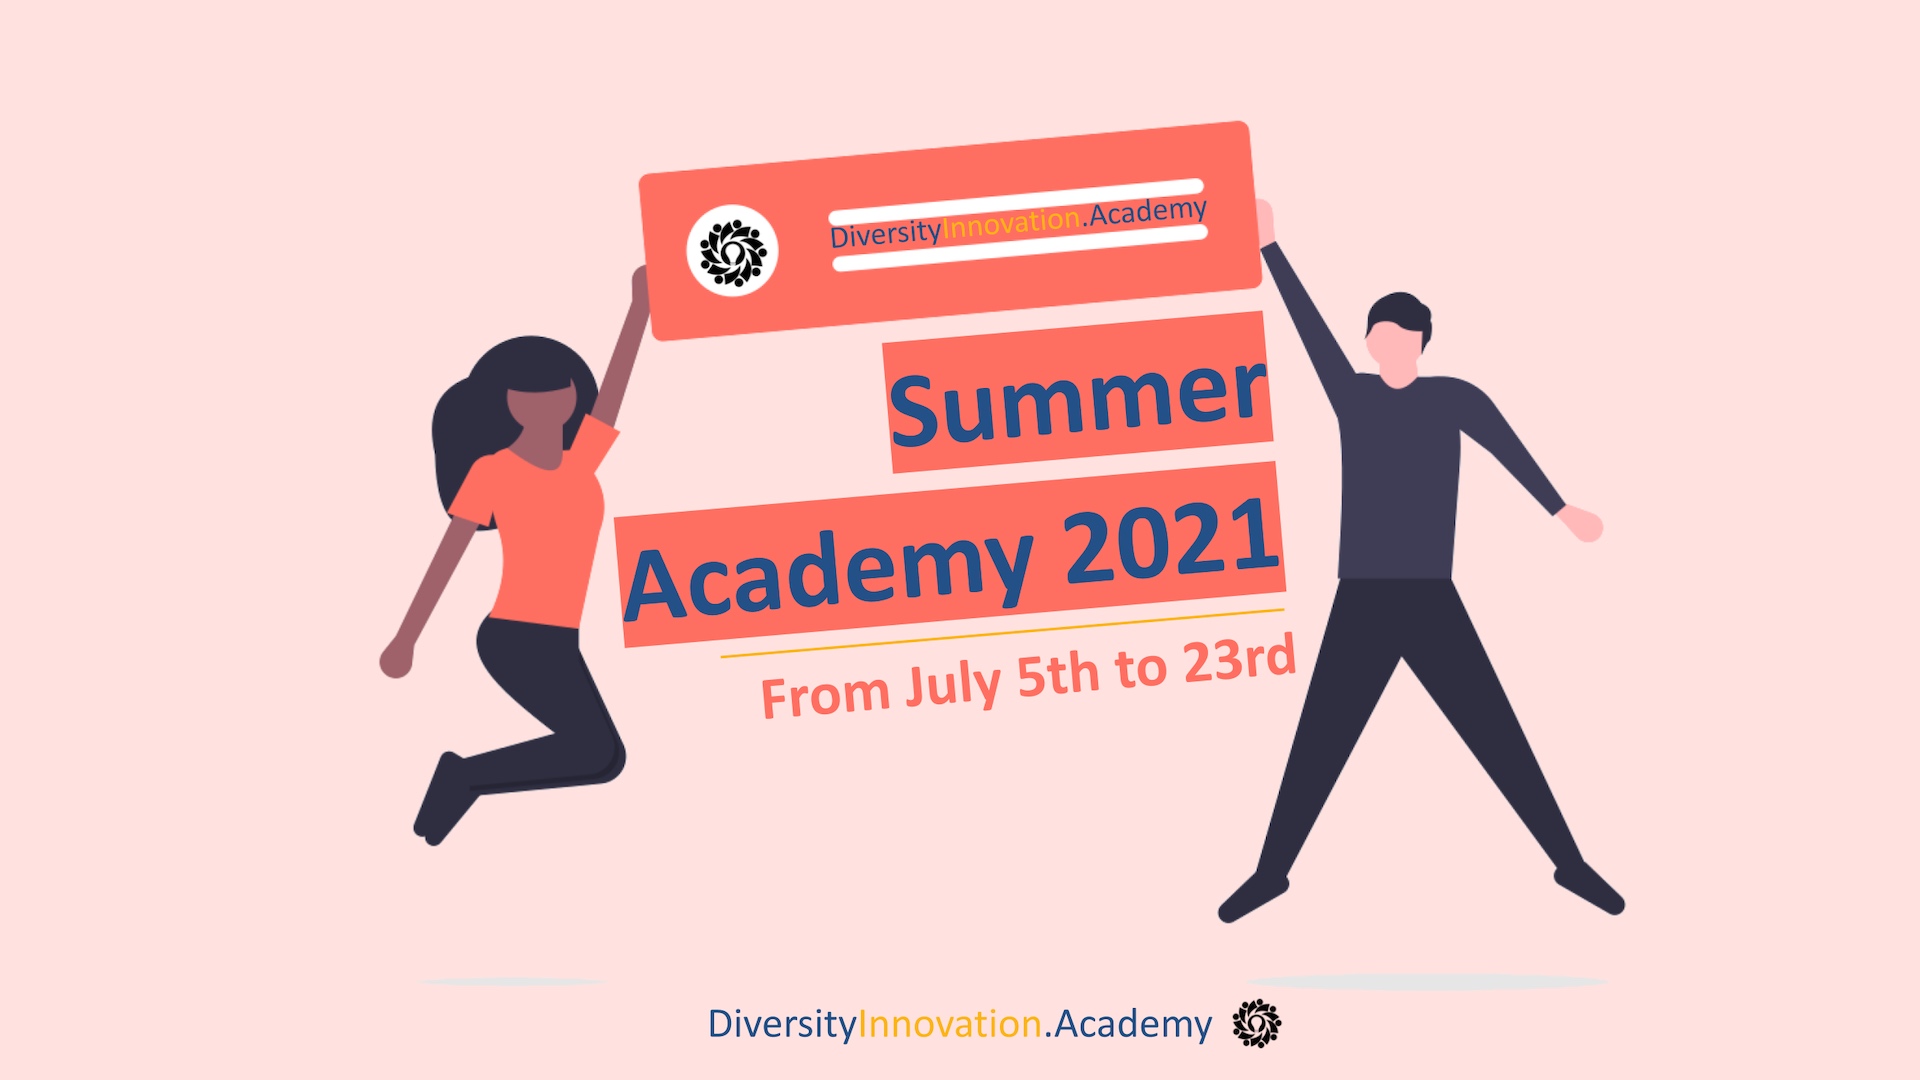 Academy for Diversity and Innovation - Summer Academy 2021